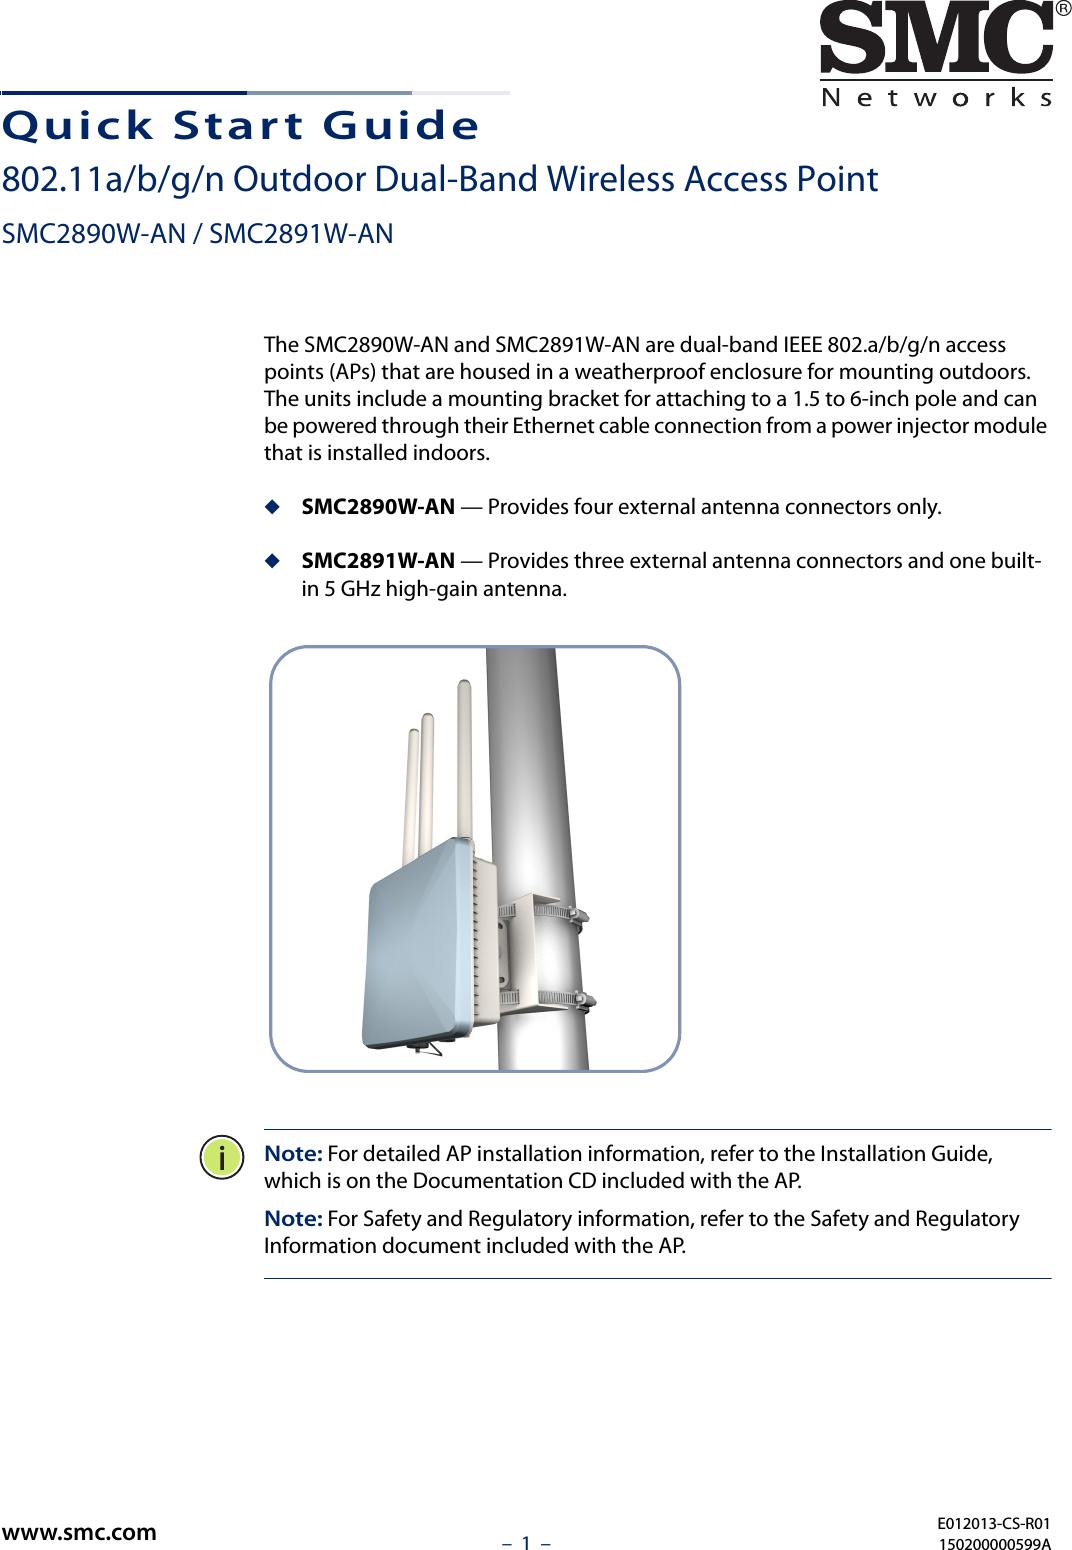 –  1  –Quick Start Guide802.11a/b/g/n Outdoor Dual-Band Wireless Access PointSMC2890W-AN / SMC2891W-ANThe SMC2890W-AN and SMC2891W-AN are dual-band IEEE 802.a/b/g/n access points (APs) that are housed in a weatherproof enclosure for mounting outdoors. The units include a mounting bracket for attaching to a 1.5 to 6-inch pole and can be powered through their Ethernet cable connection from a power injector module that is installed indoors.◆SMC2890W-AN — Provides four external antenna connectors only.◆SMC2891W-AN — Provides three external antenna connectors and one built-in 5 GHz high-gain antenna. Note: For detailed AP installation information, refer to the Installation Guide,  which is on the Documentation CD included with the AP.Note: For Safety and Regulatory information, refer to the Safety and Regulatory Information document included with the AP.E012013-CS-R01150200000599Awww.smc.com